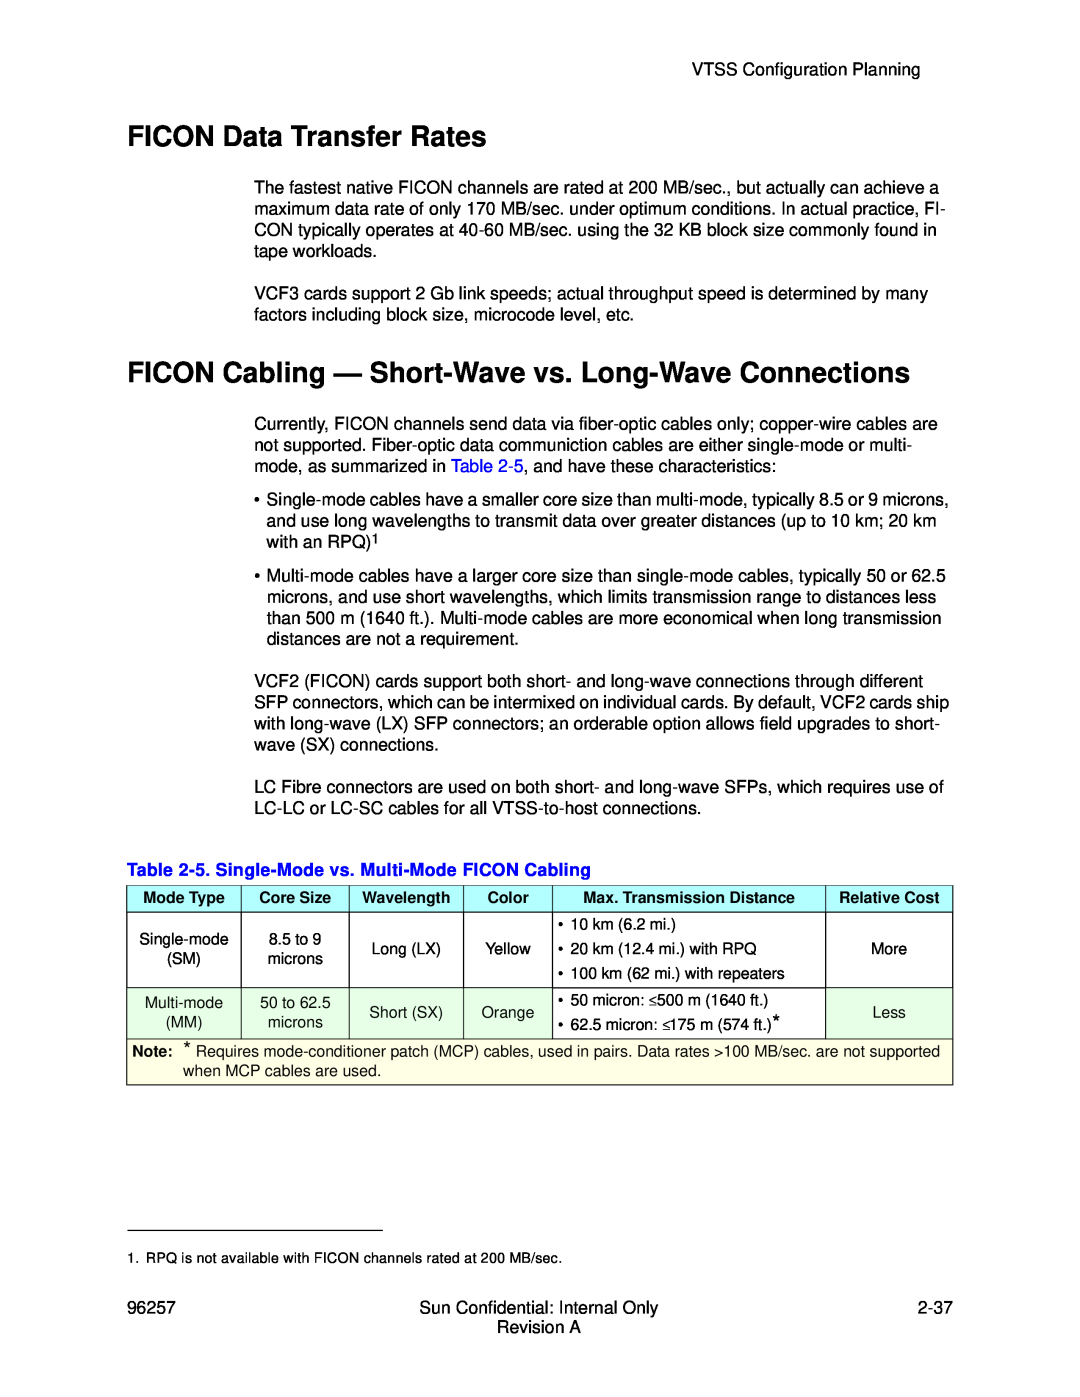 Sun Microsystems 96257 manual FICON Data Transfer Rates, FICON Cabling - Short-Wave vs. Long-Wave Connections 